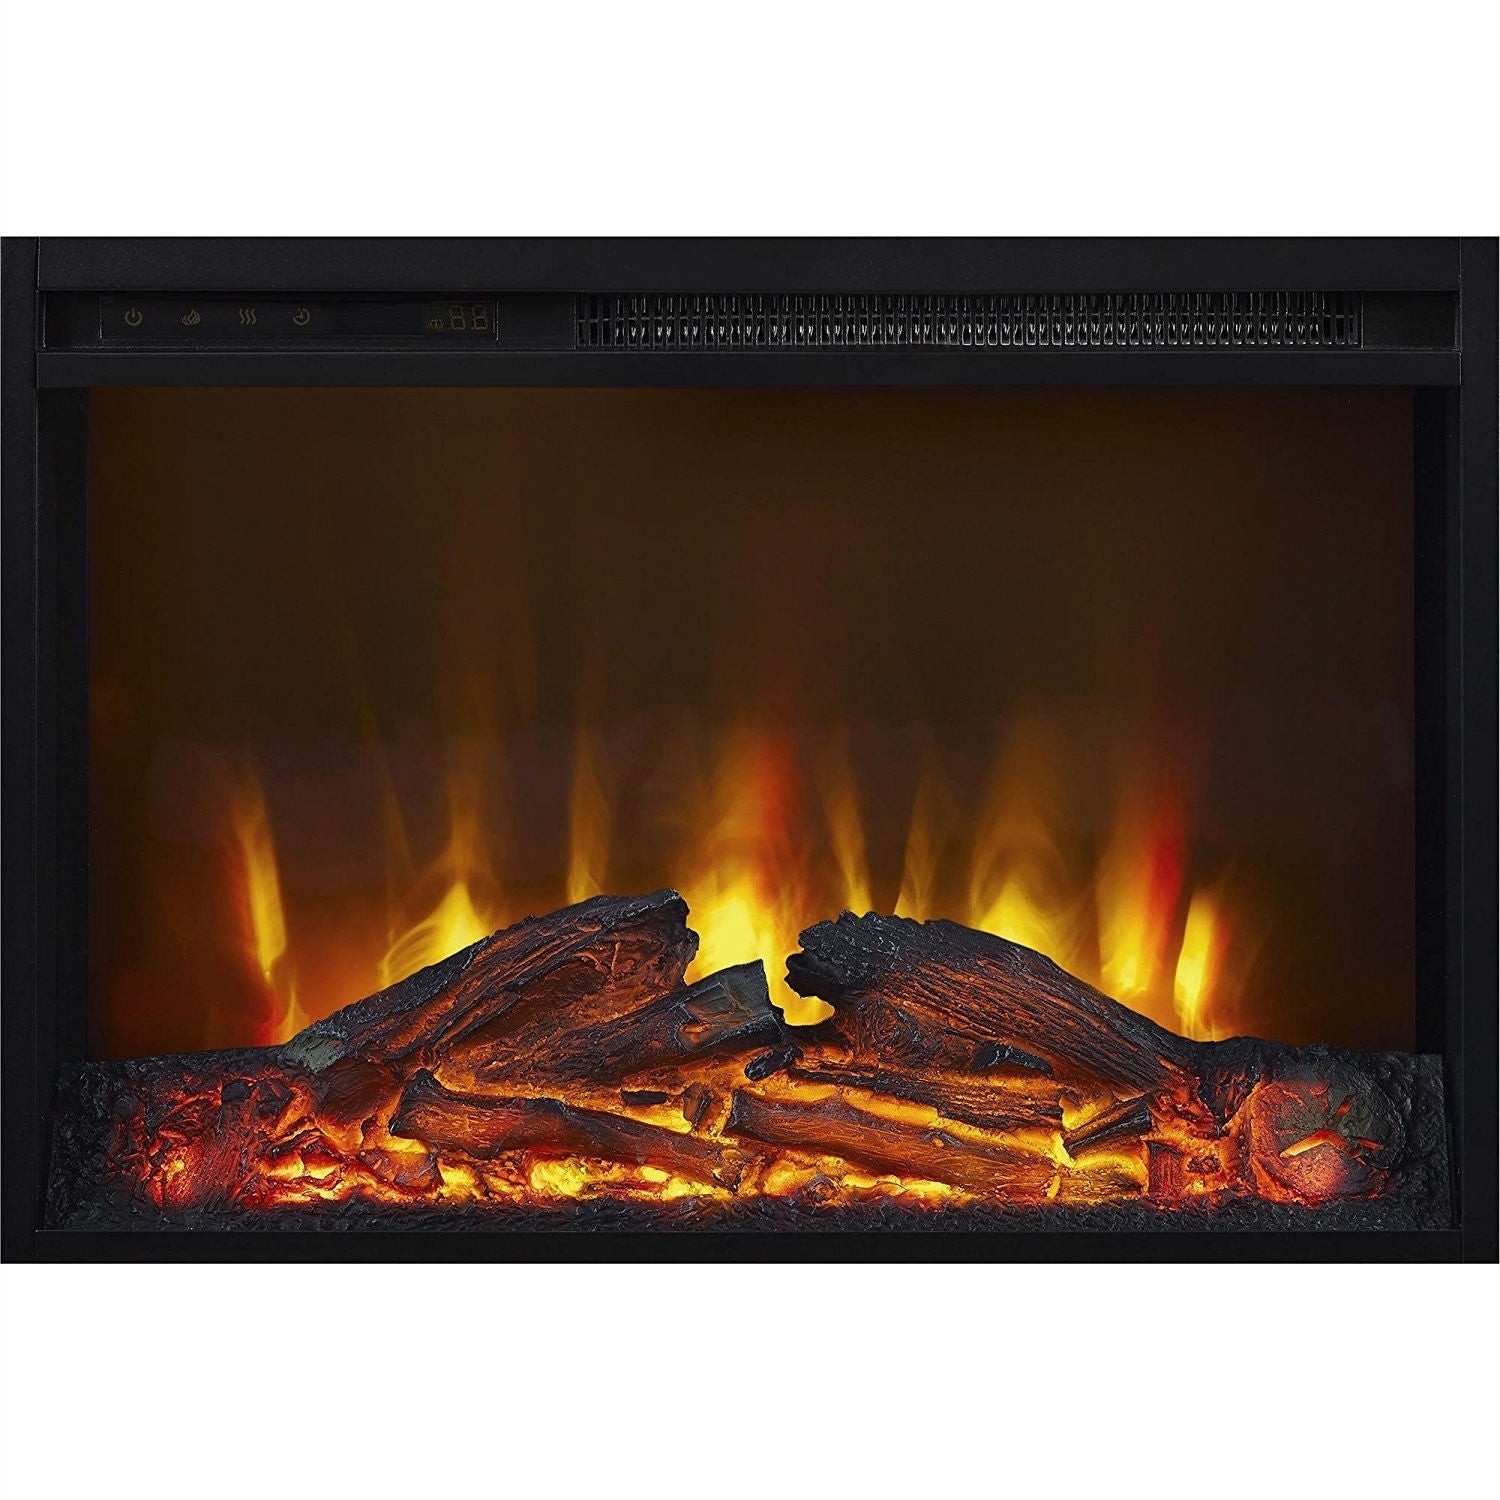 Accents > Electric Fireplaces - 50-inch TV Stand In Medium Brown Wood With 1,500 Watt Electric Fireplace